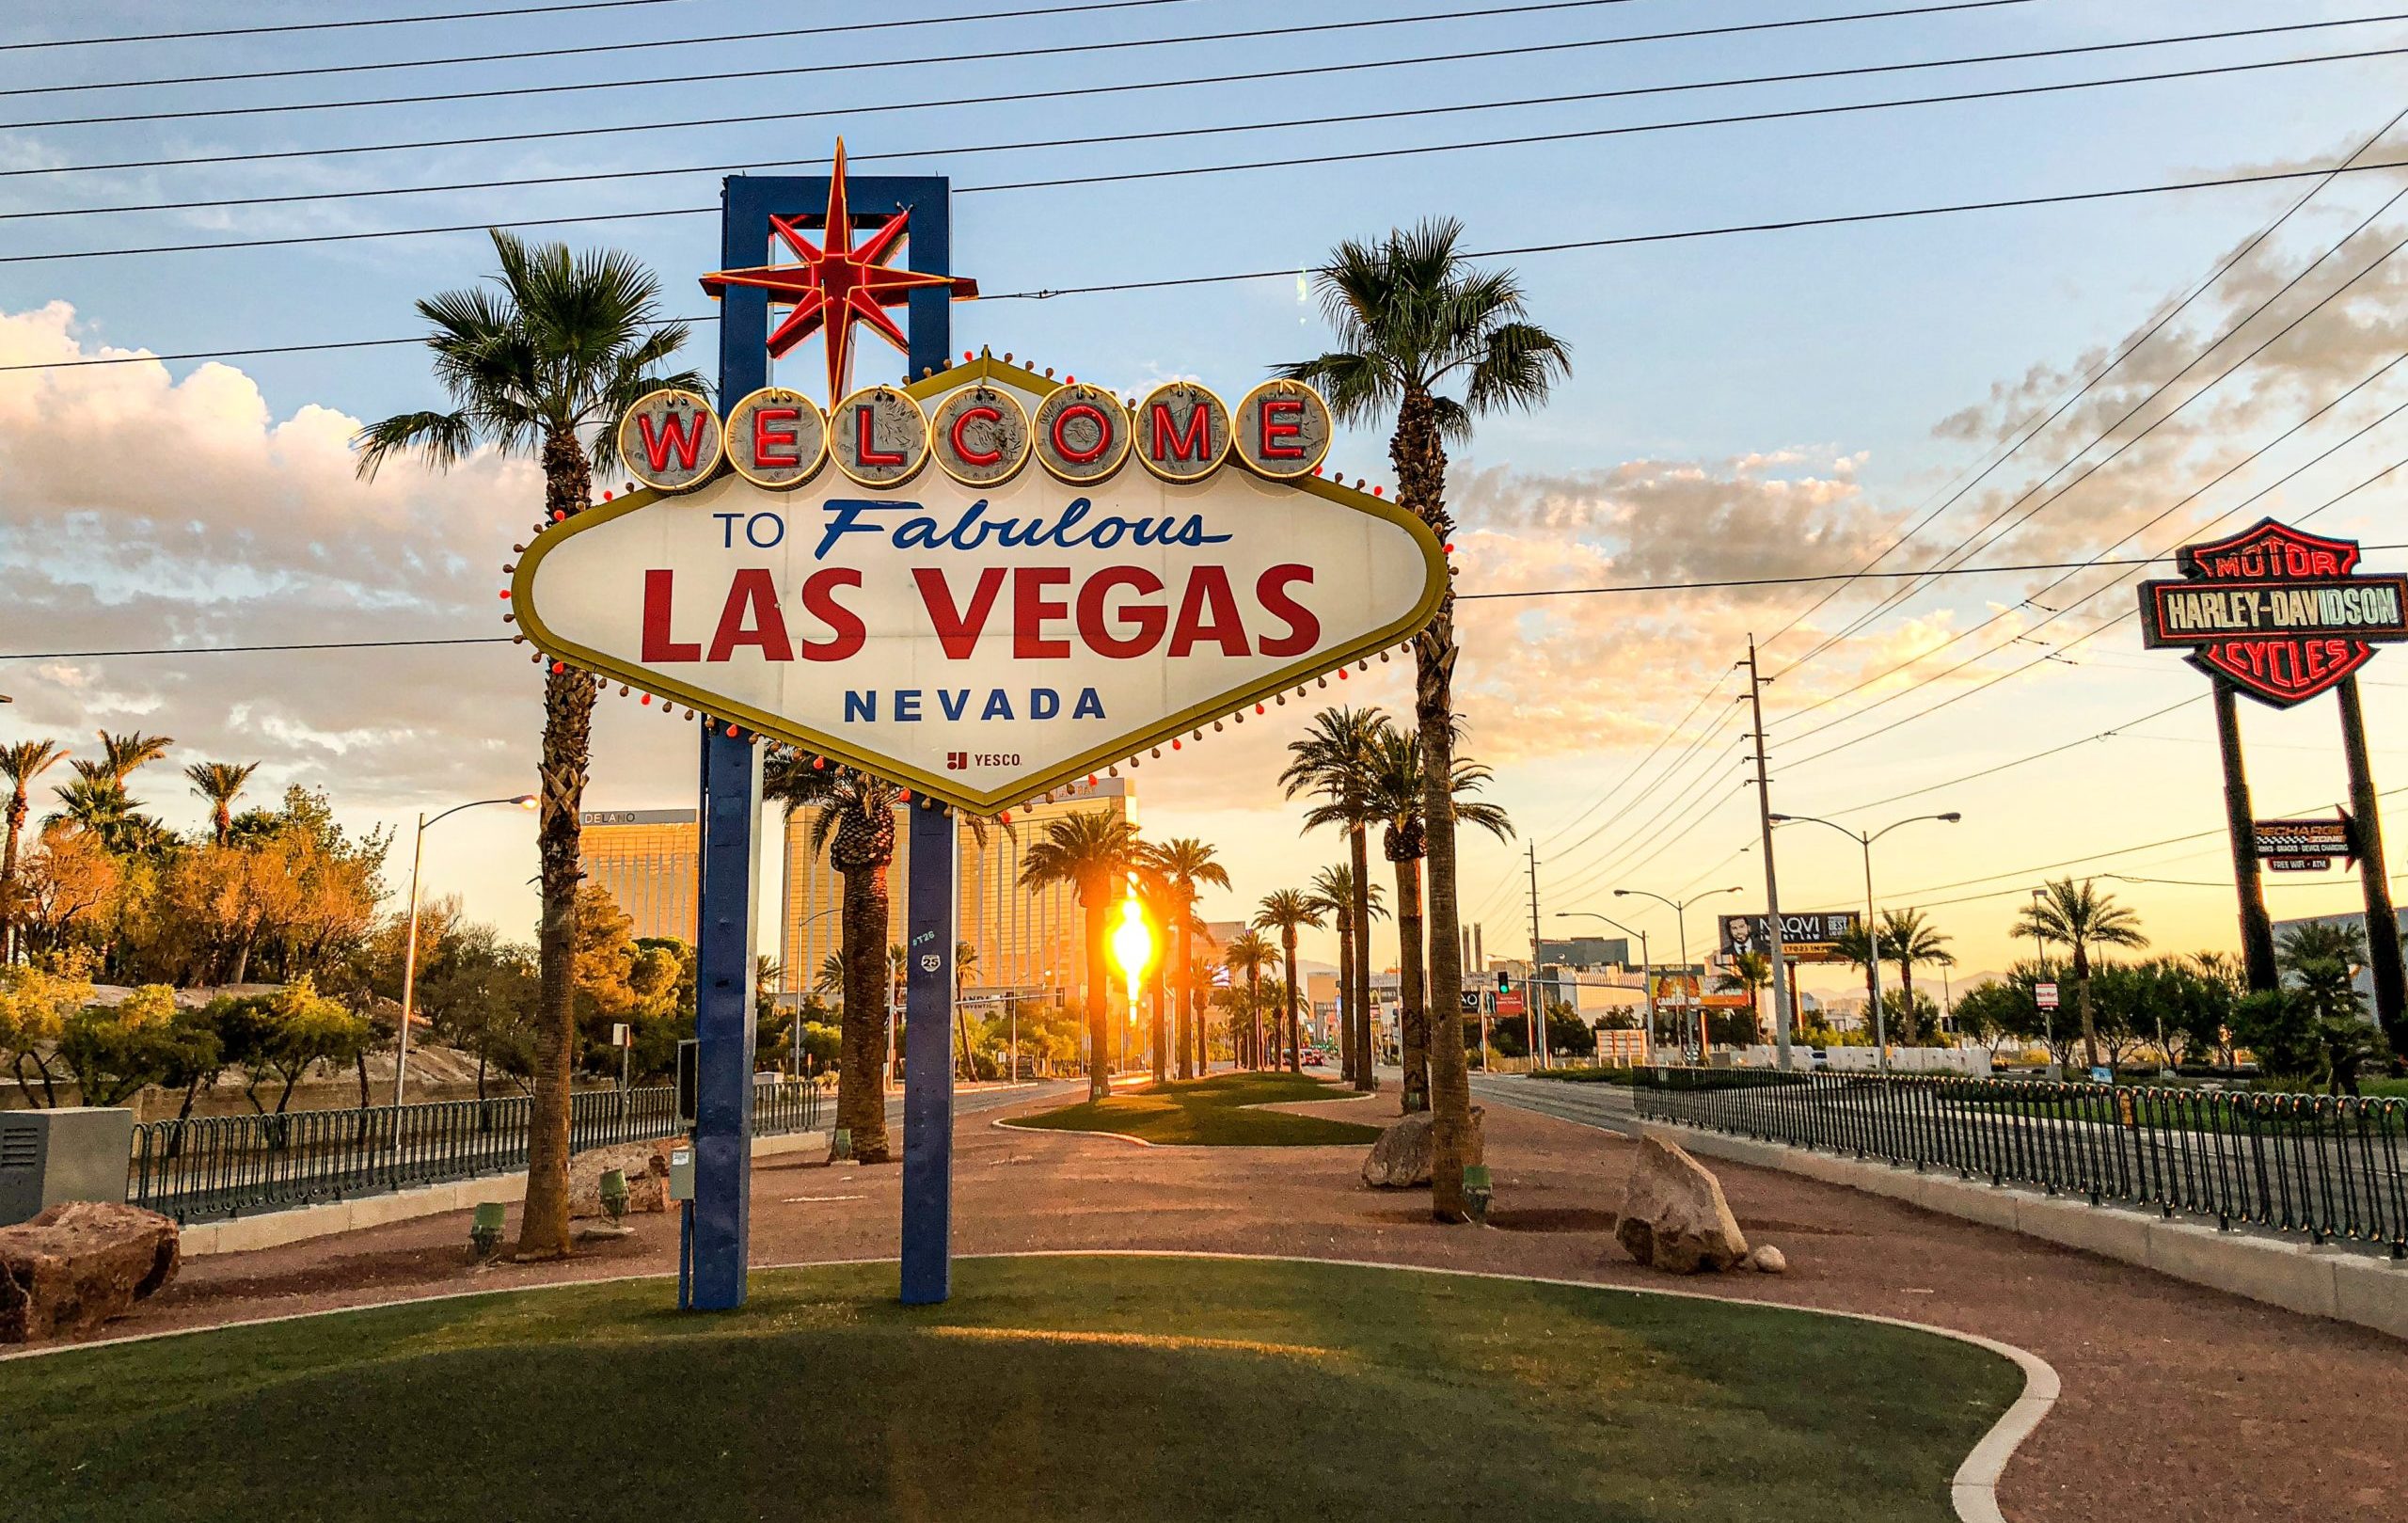 3 mistakes to avoid when visiting Las Vegas.